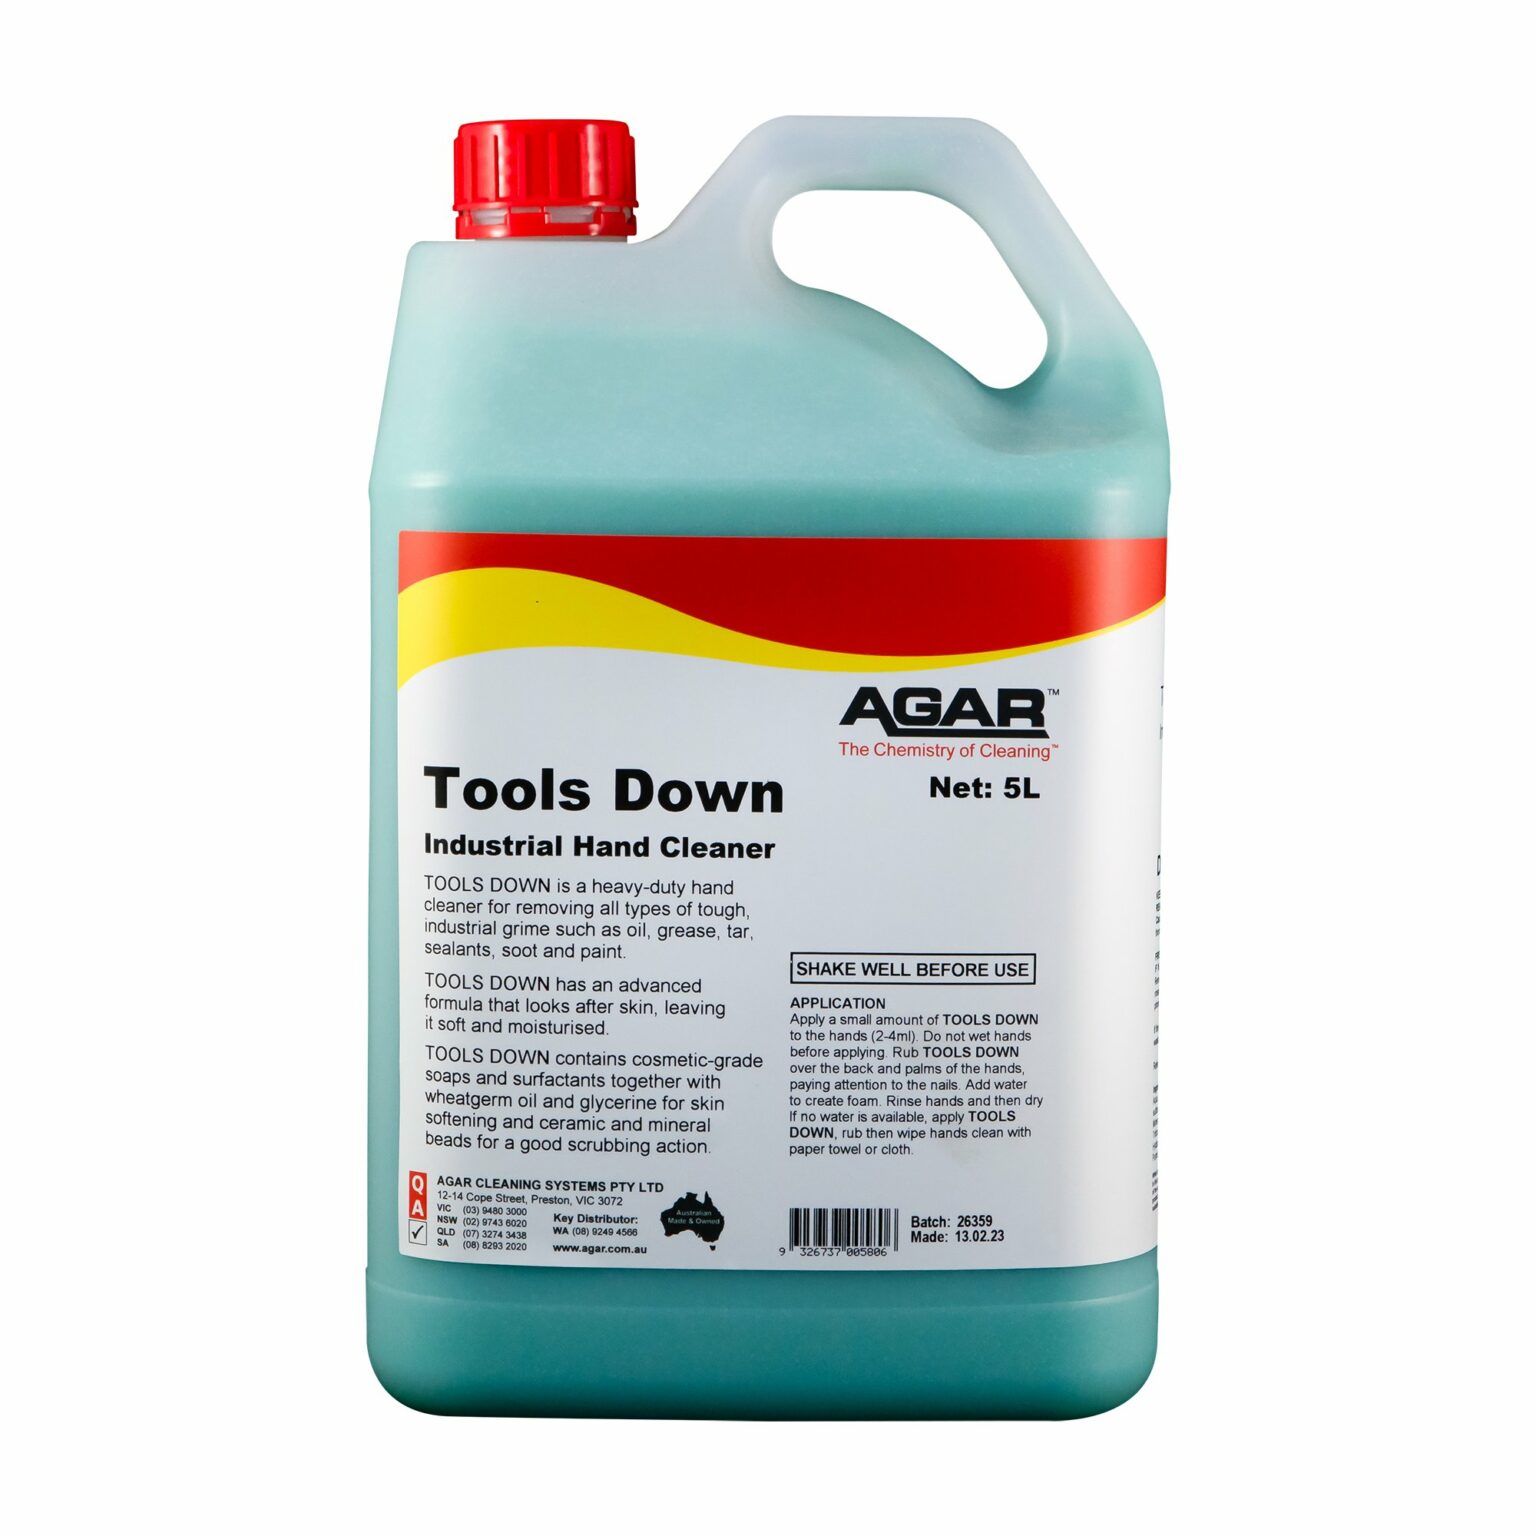 Agar Tools Down Industrial Hand Cleaner, 5L